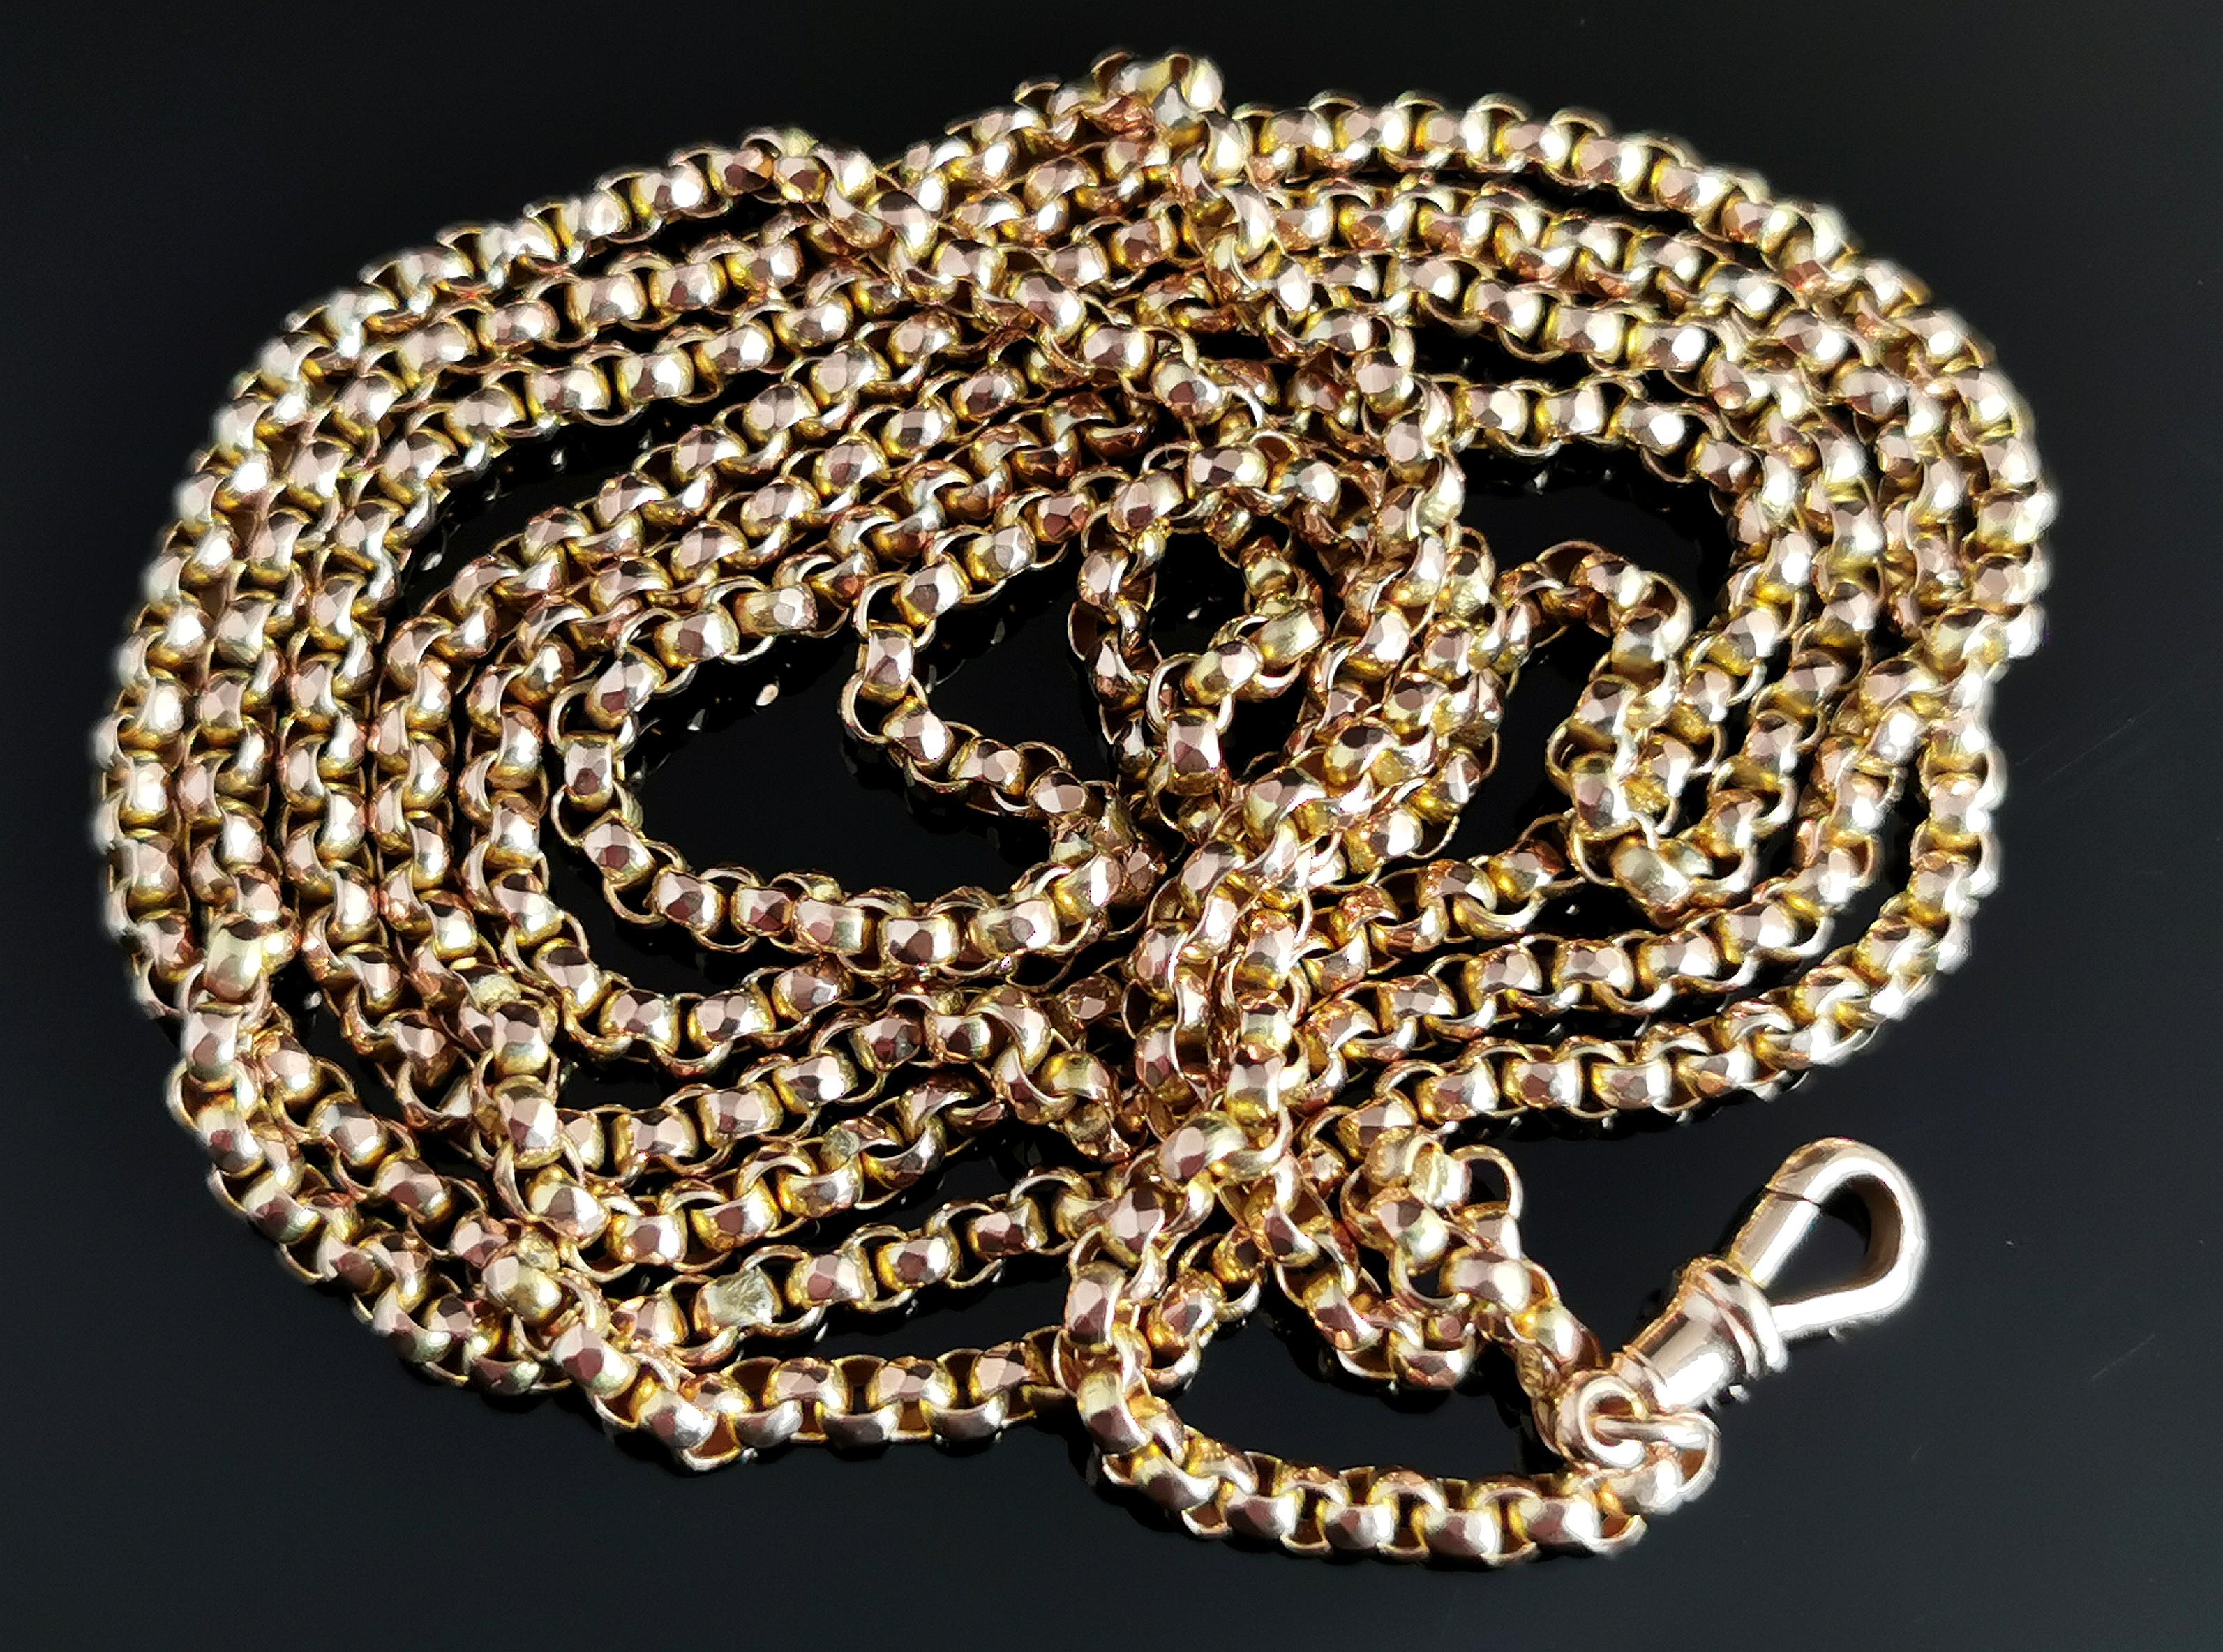 A stunning antique, Victorian 9kt yellow gold longuard chain.

We love a good longuard chain here, such a versatile and wearable piece of jewellery, this one is no exception.

Stunning boxy belcher or rolo links in rich yellow gold, this is a solid